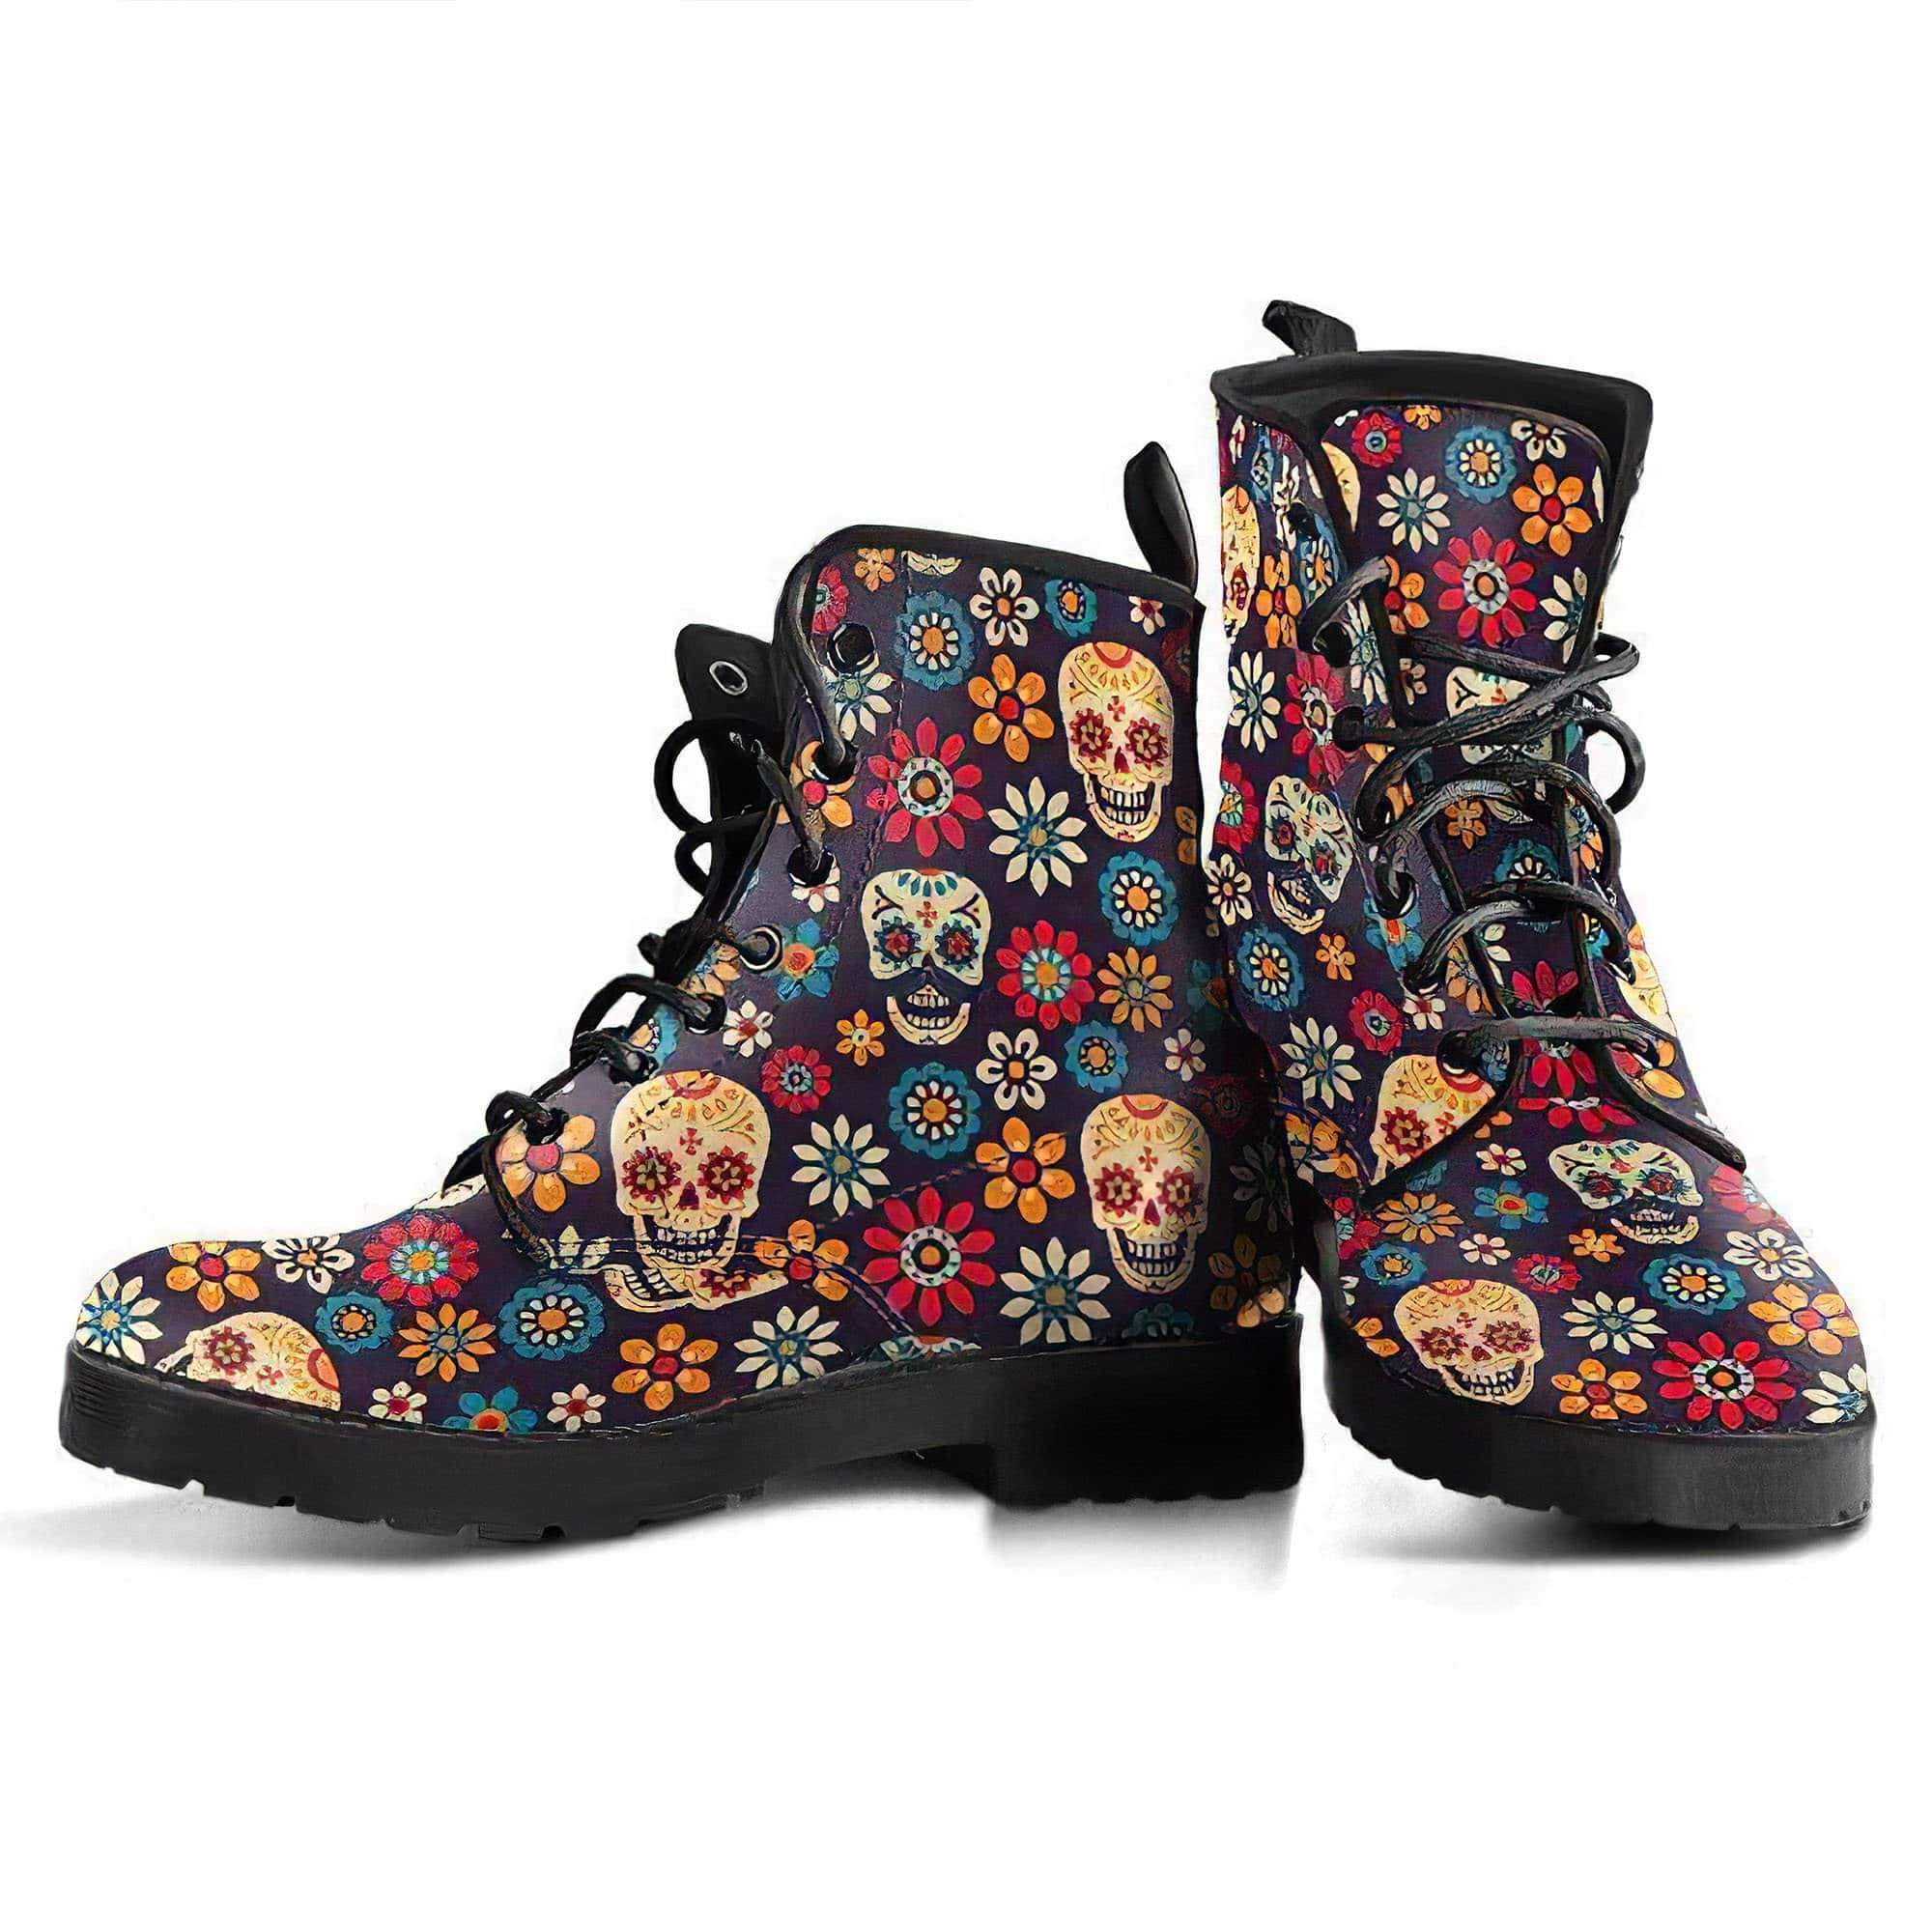 sugar-skull-1-handcrafted-boots-women-s-leather-boots-12051953418301.jpg